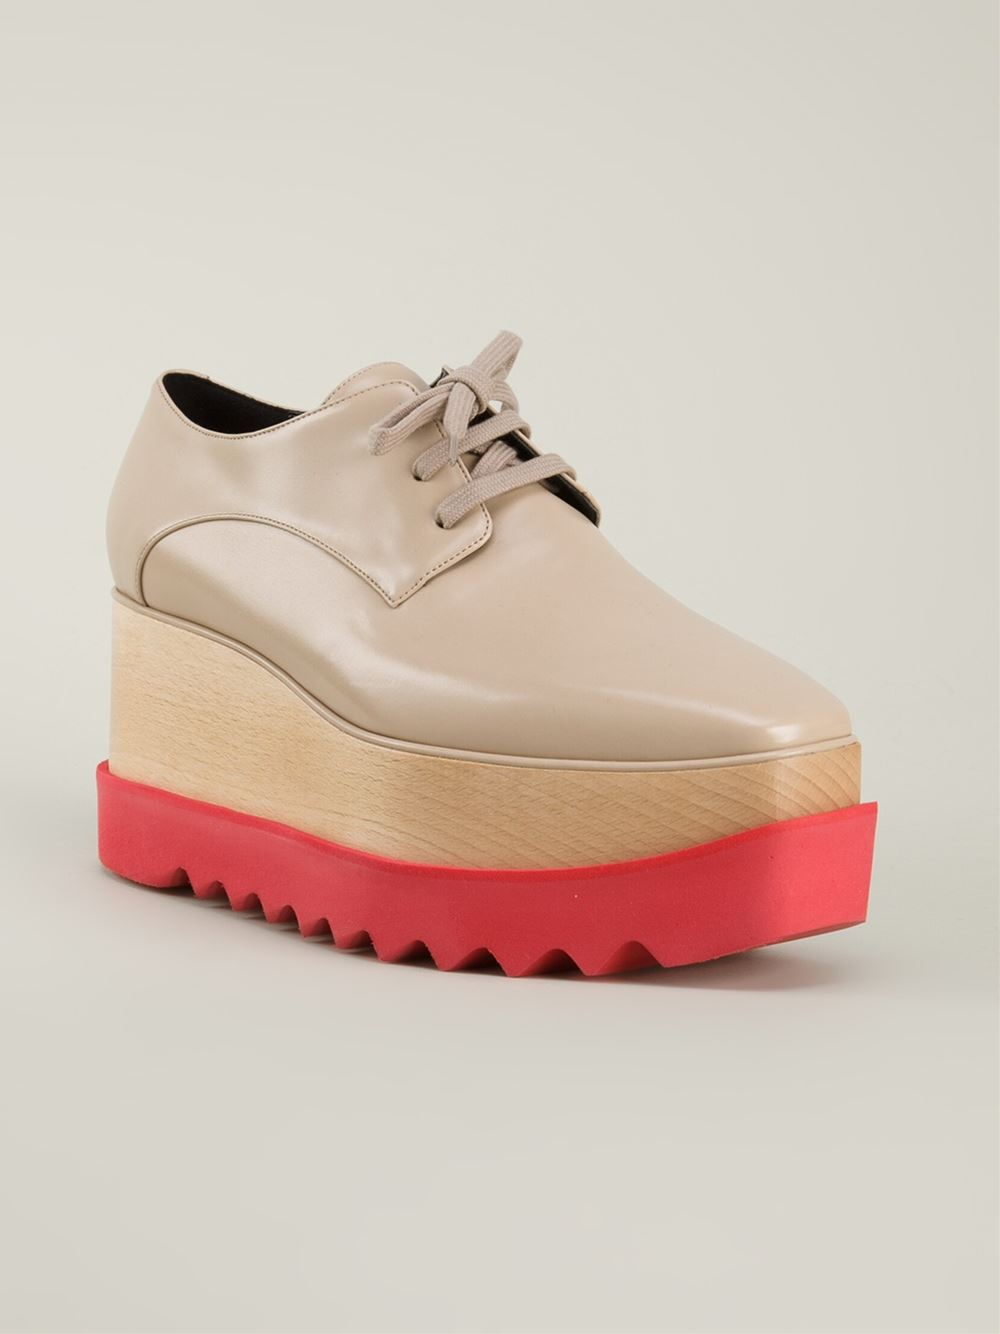 Stella McCartney 'Scarpa Plast.S.Gomma' Loafers in Natural | Lyst